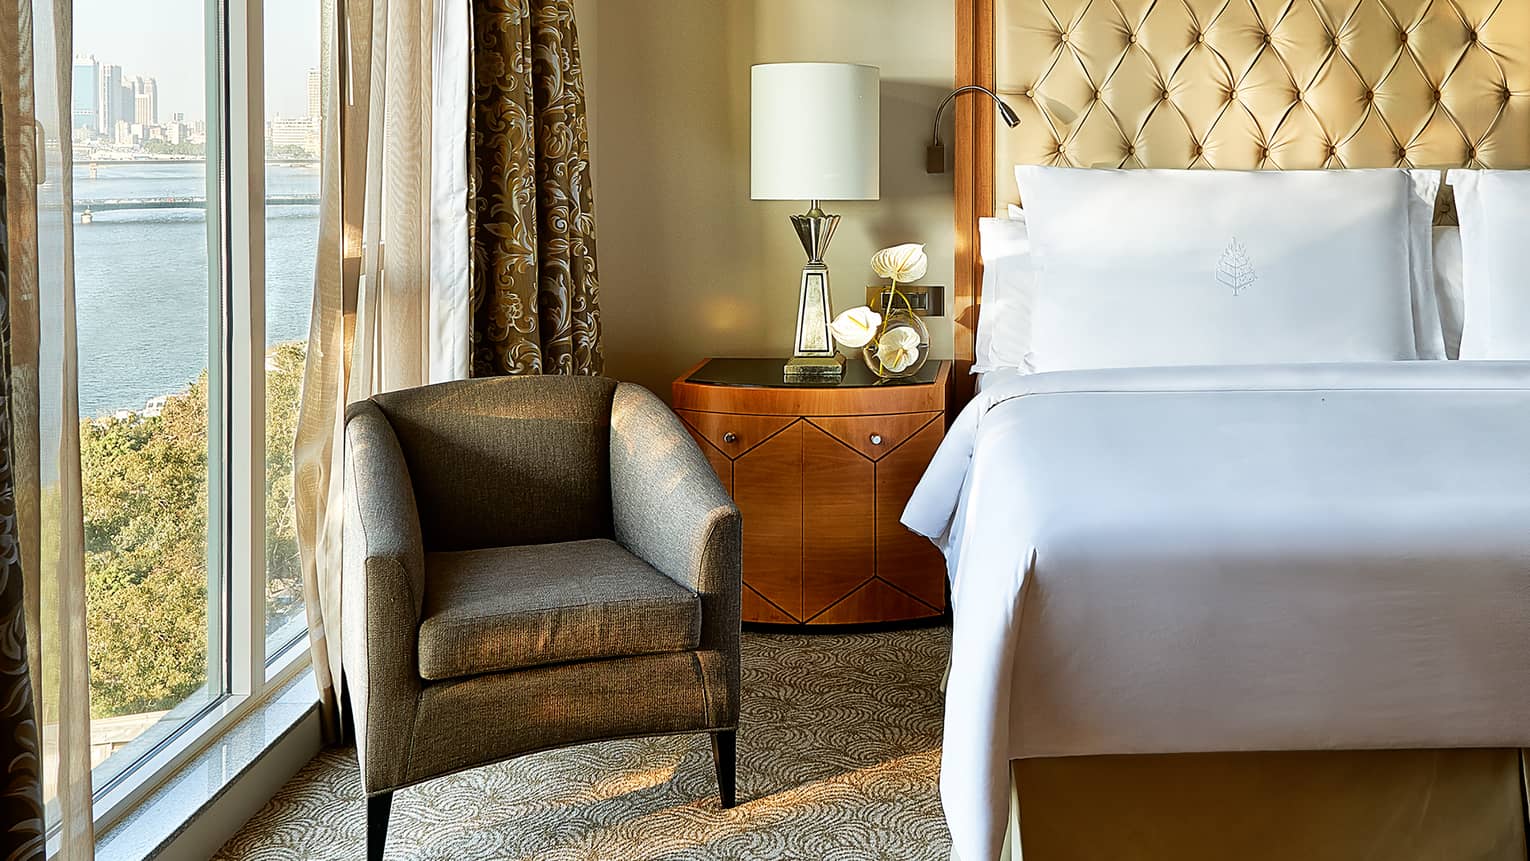 Royal Suite close-up of white pillows and tall leather headboard, wooden side table with lamp and white orchids